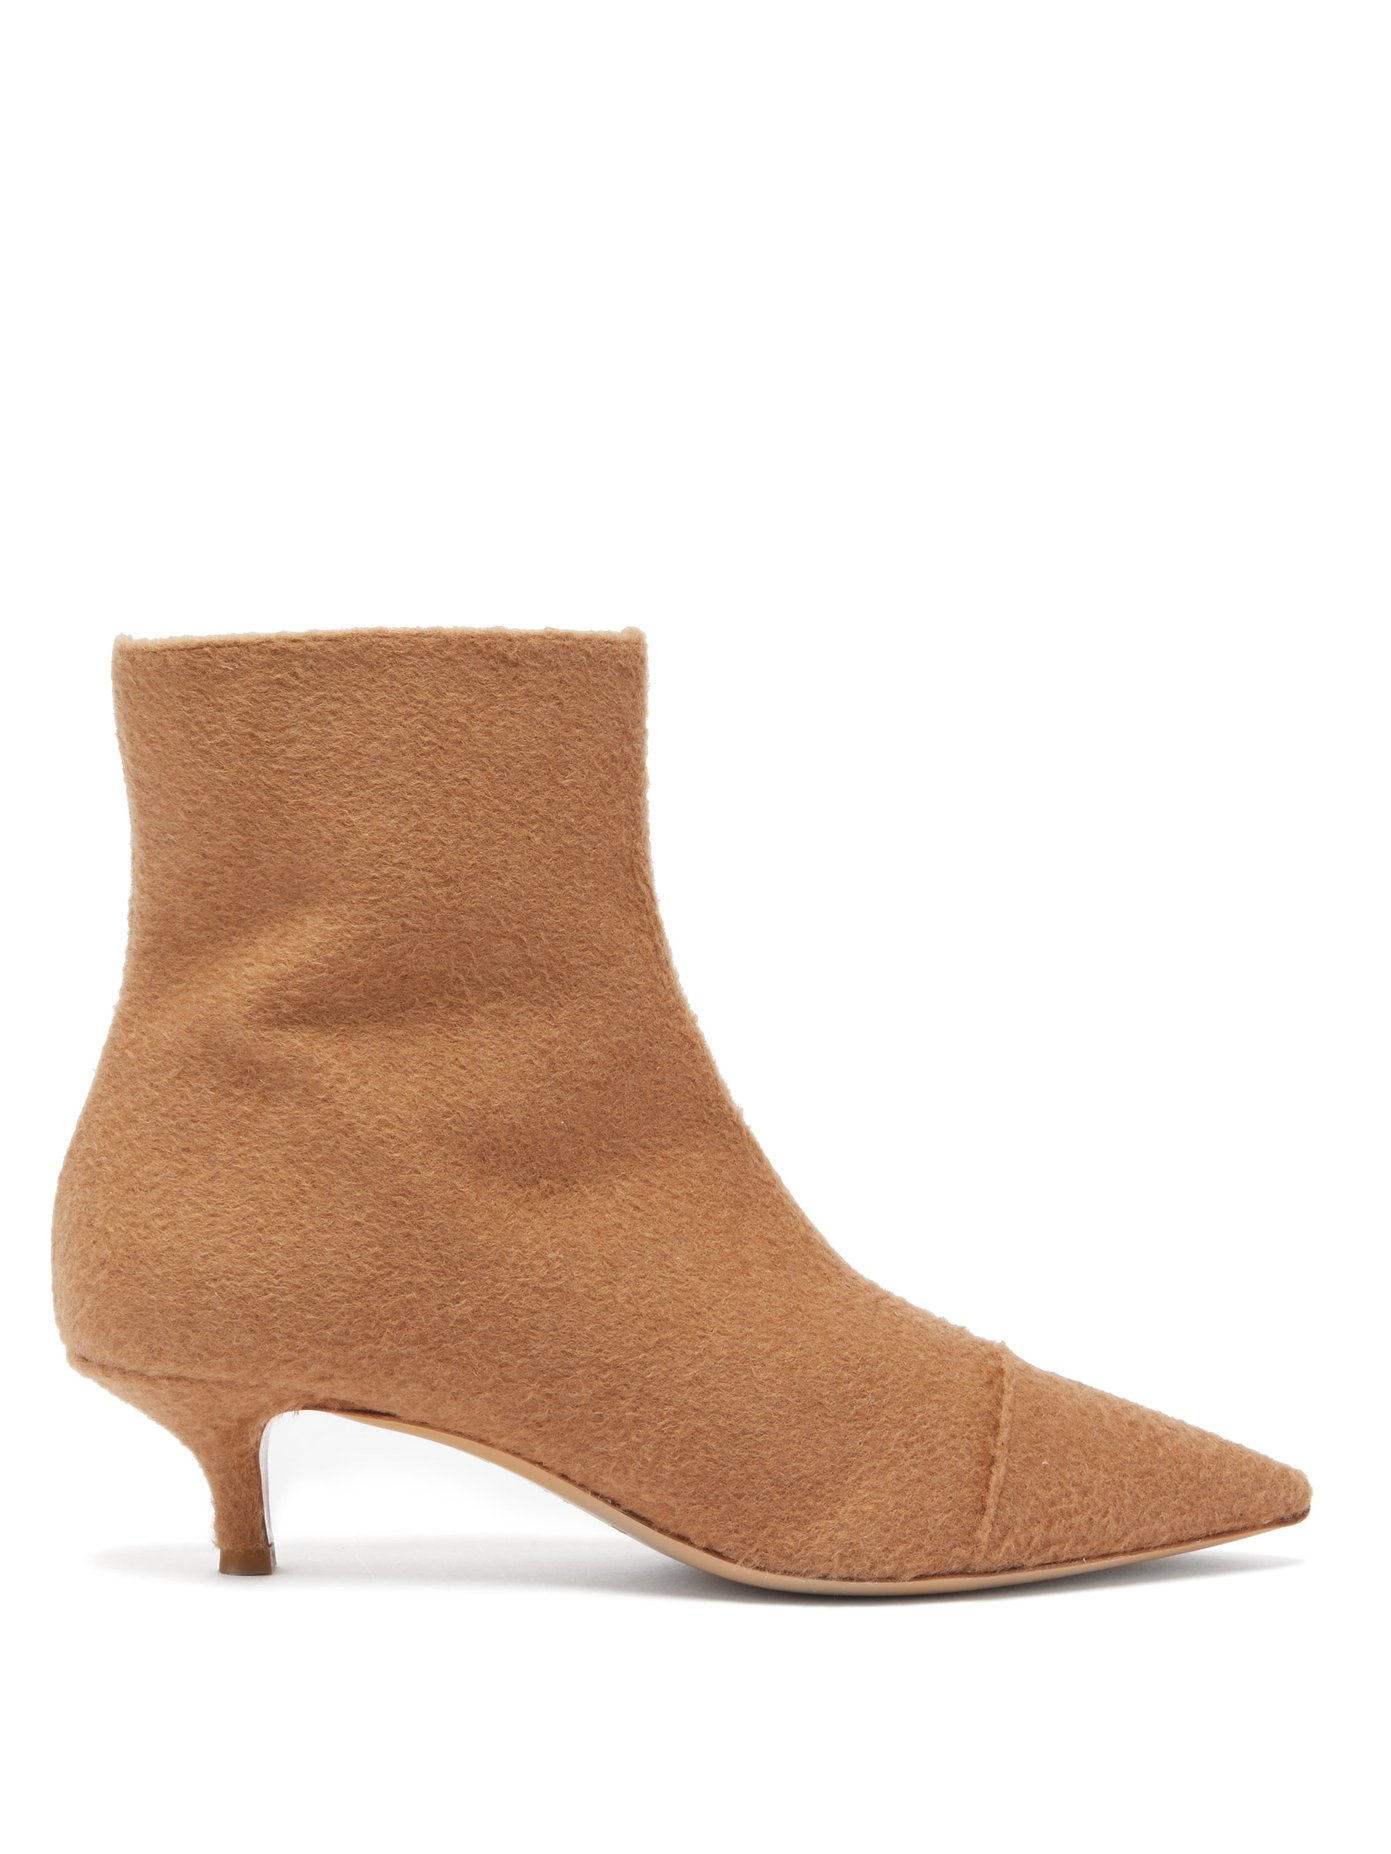 camel ankle boots uk